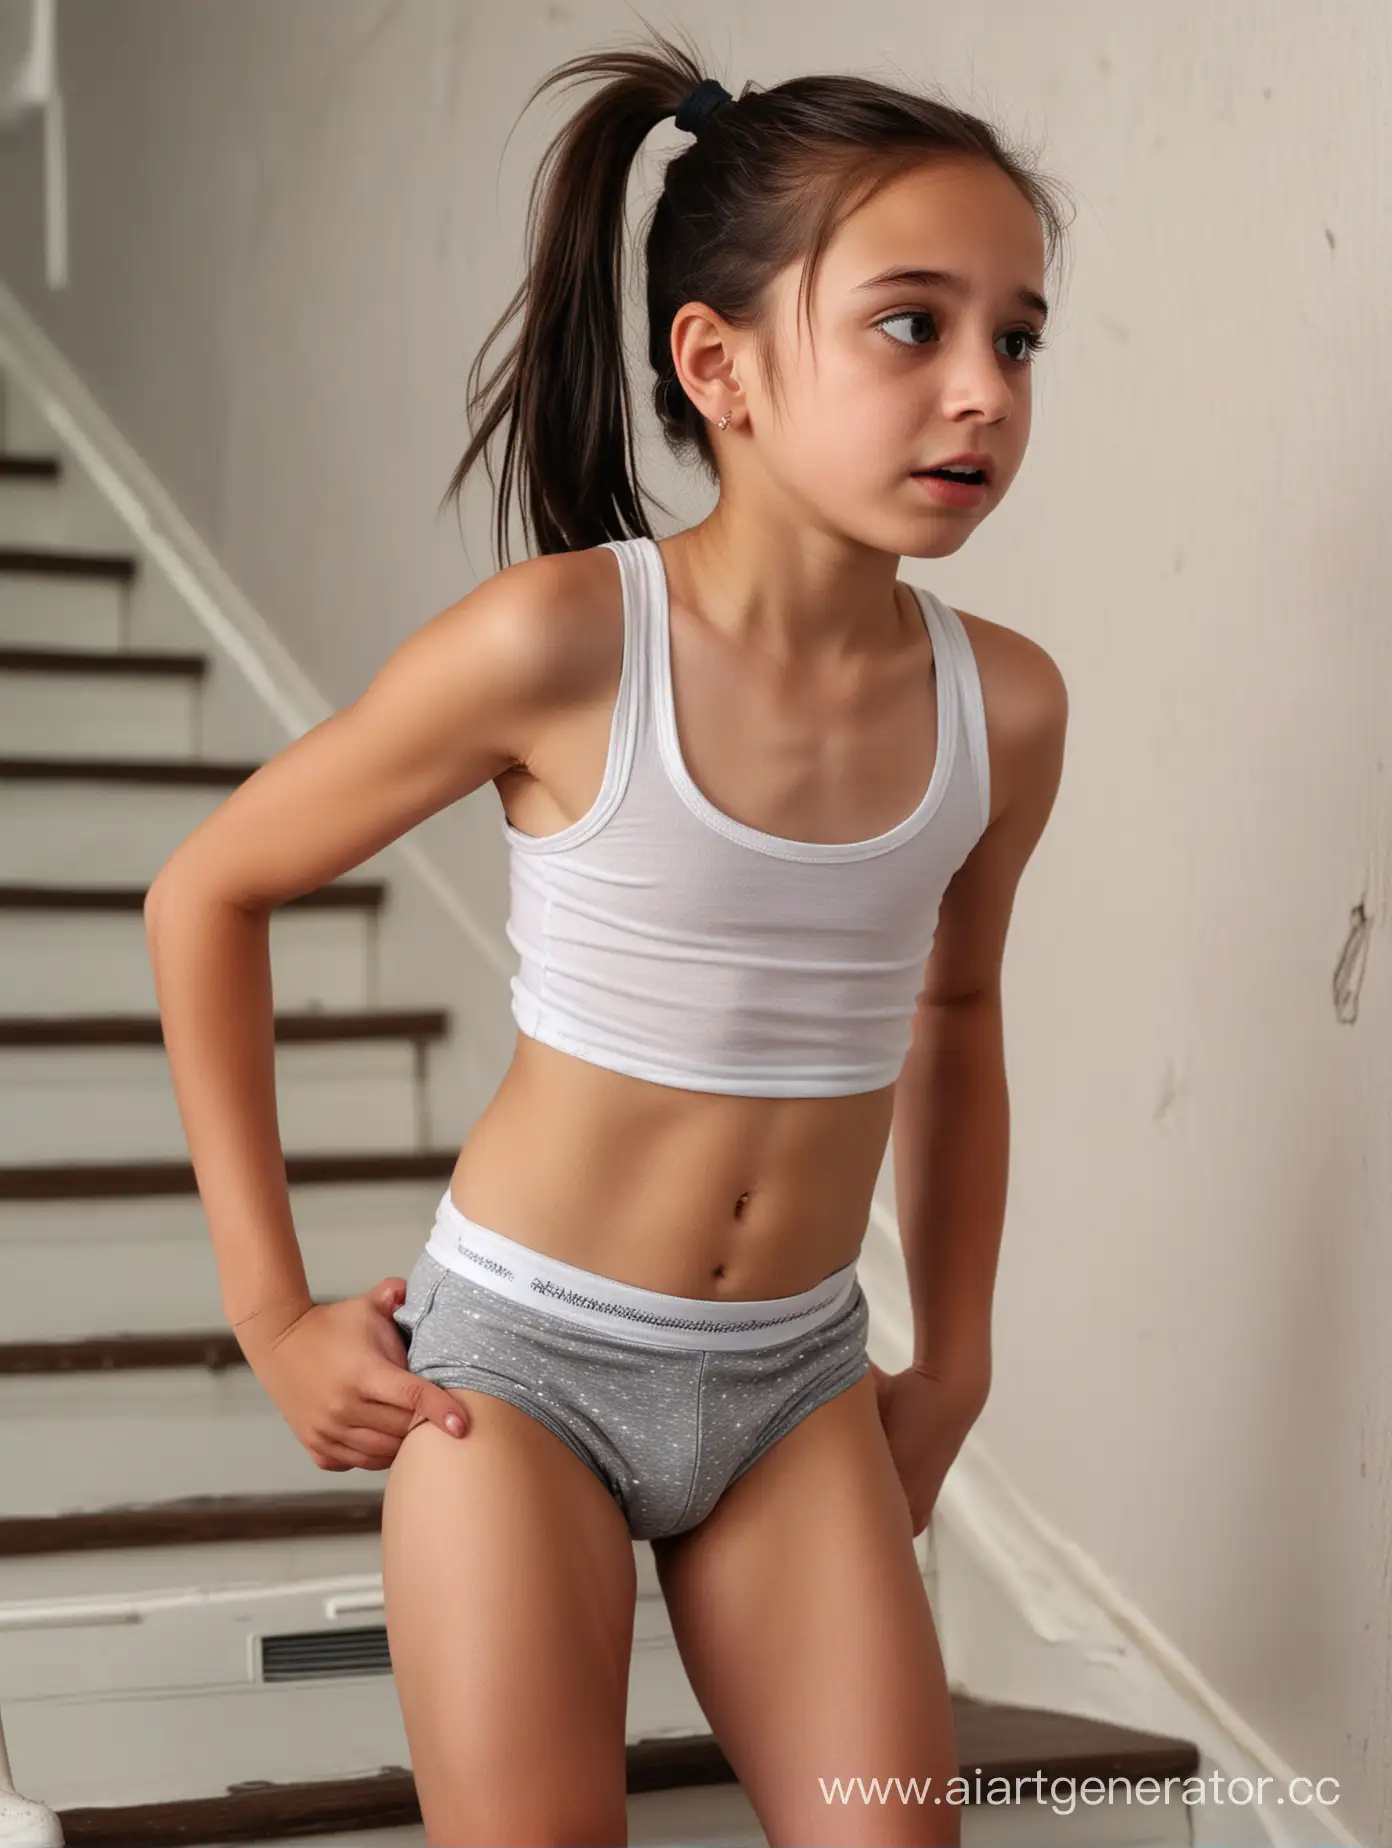 Upset-Arabian-Girl-Standing-on-Stairs-CloseUp-Portrait-of-a-Crying-10YearOld-with-Dark-Hair-and-Ponytail